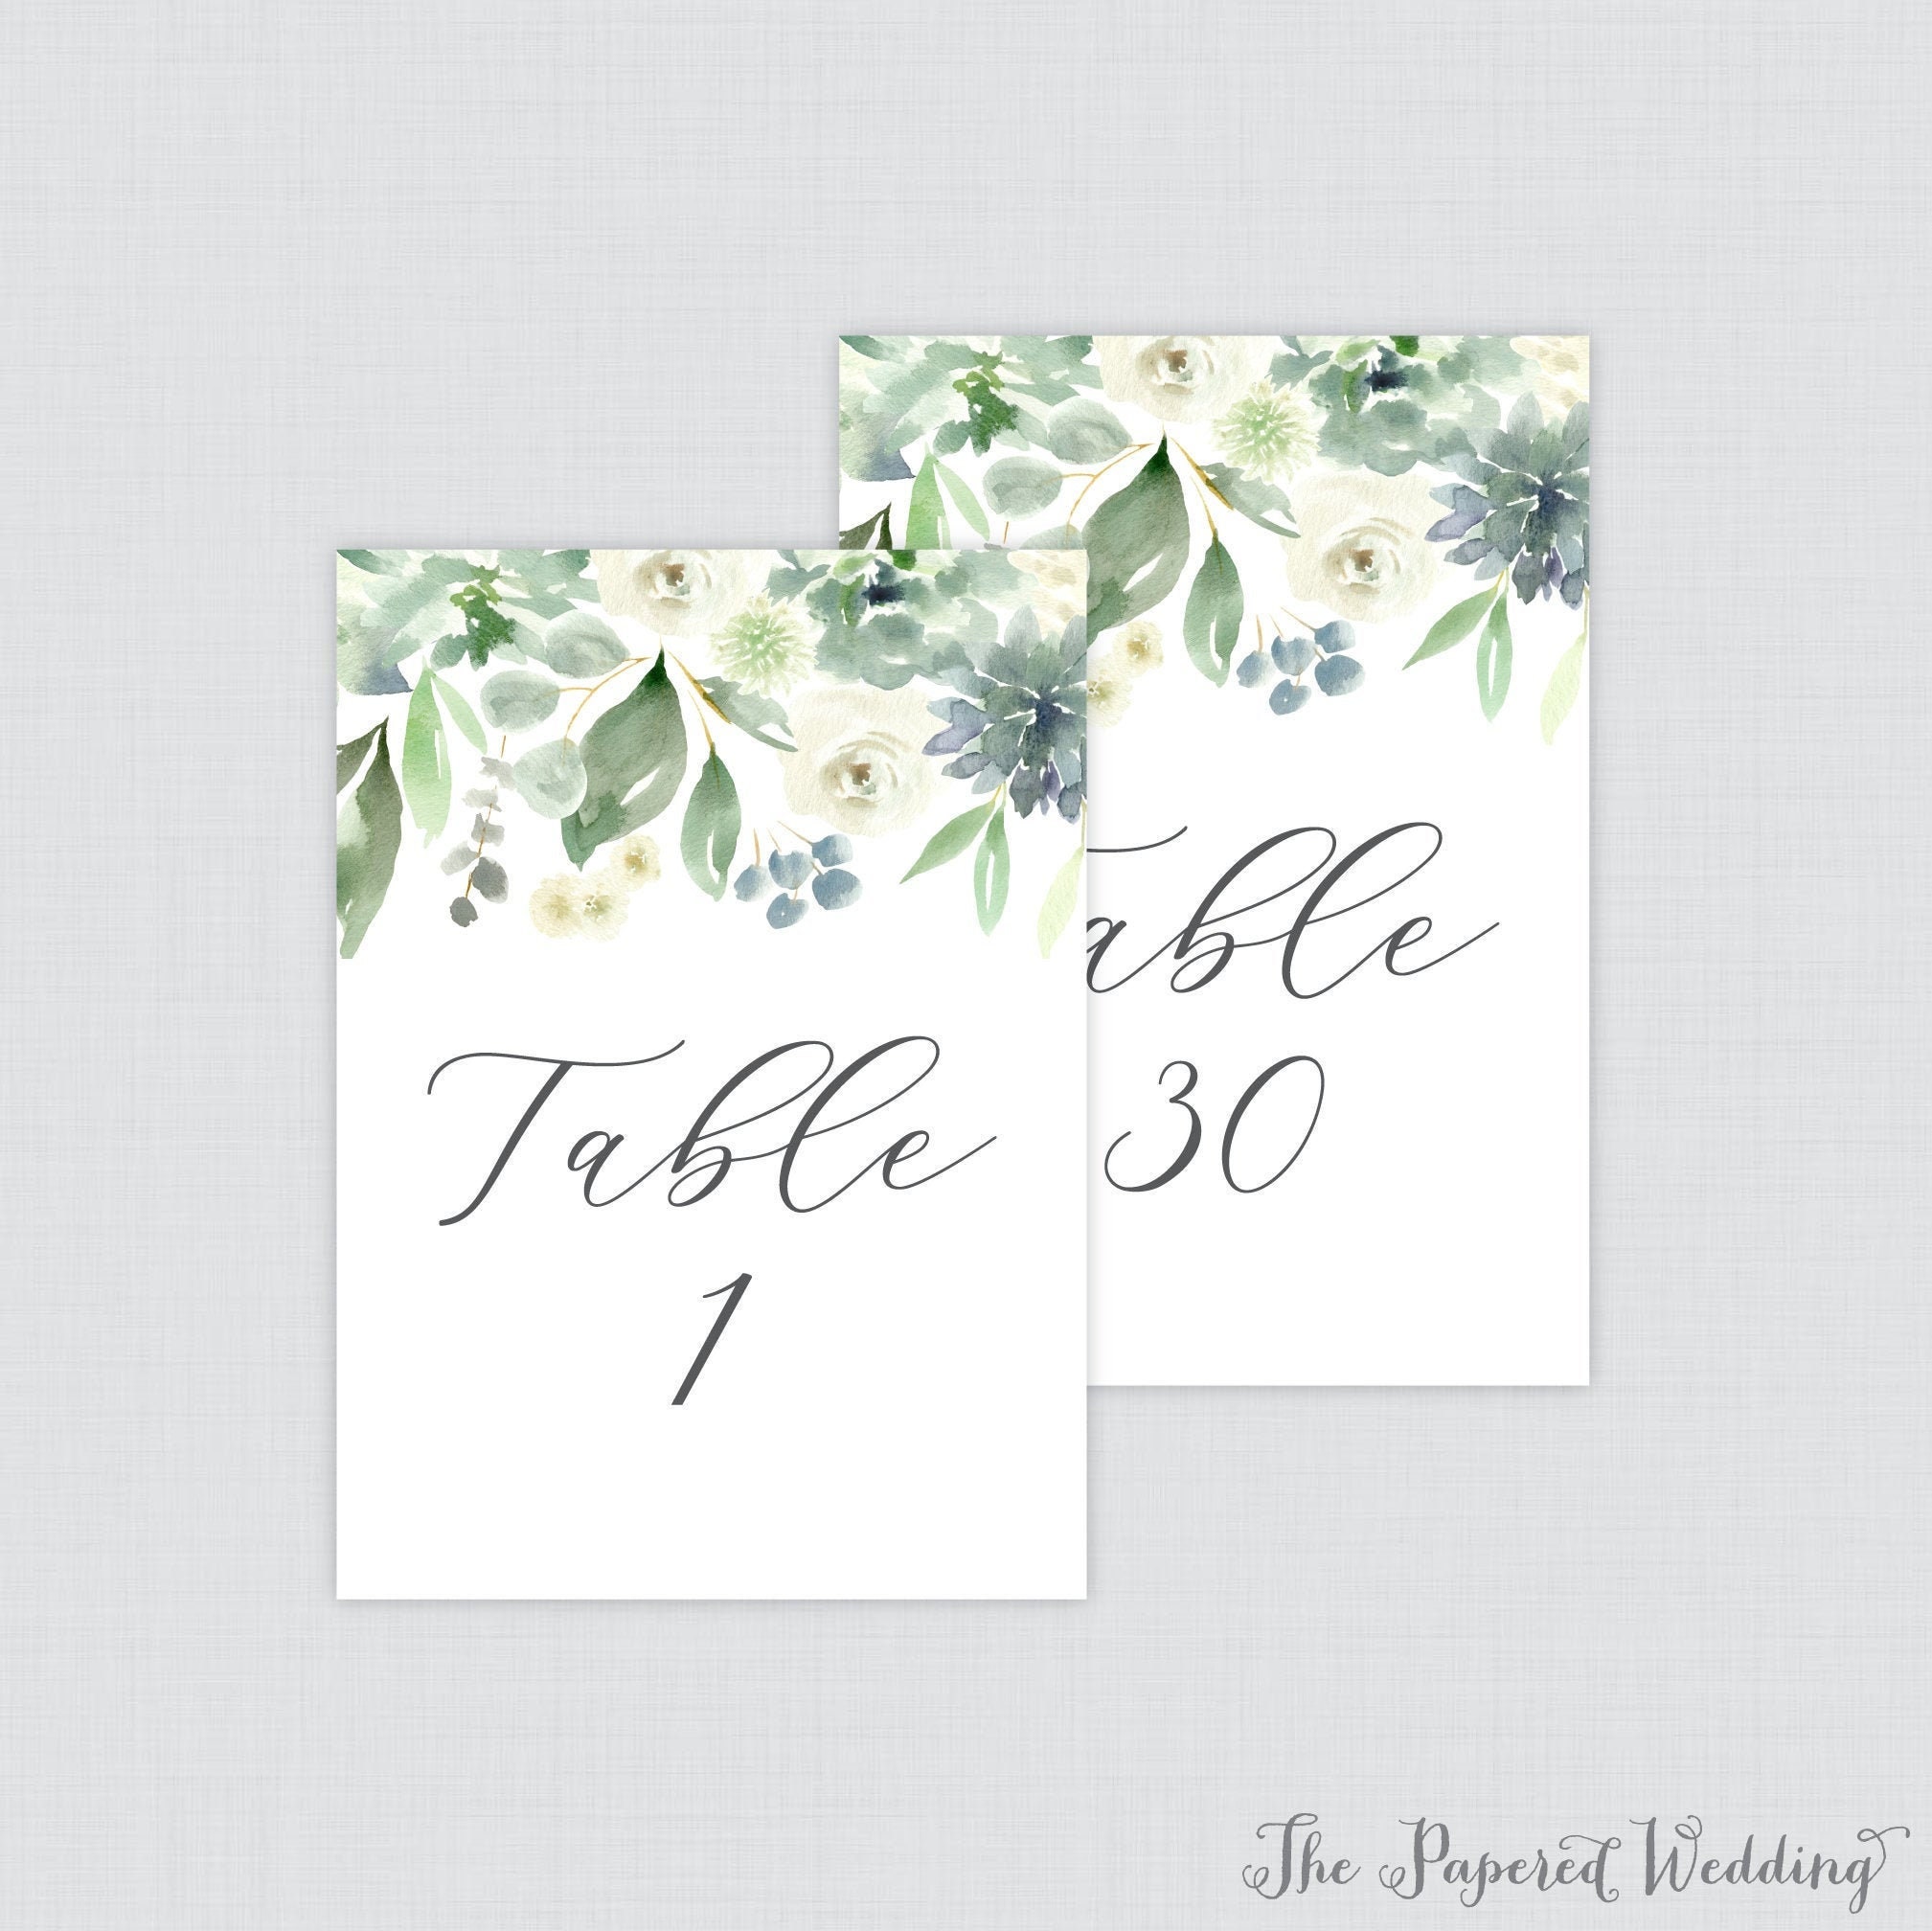 Printable OR Printed Wedding Favor Tags With Custom Colors and